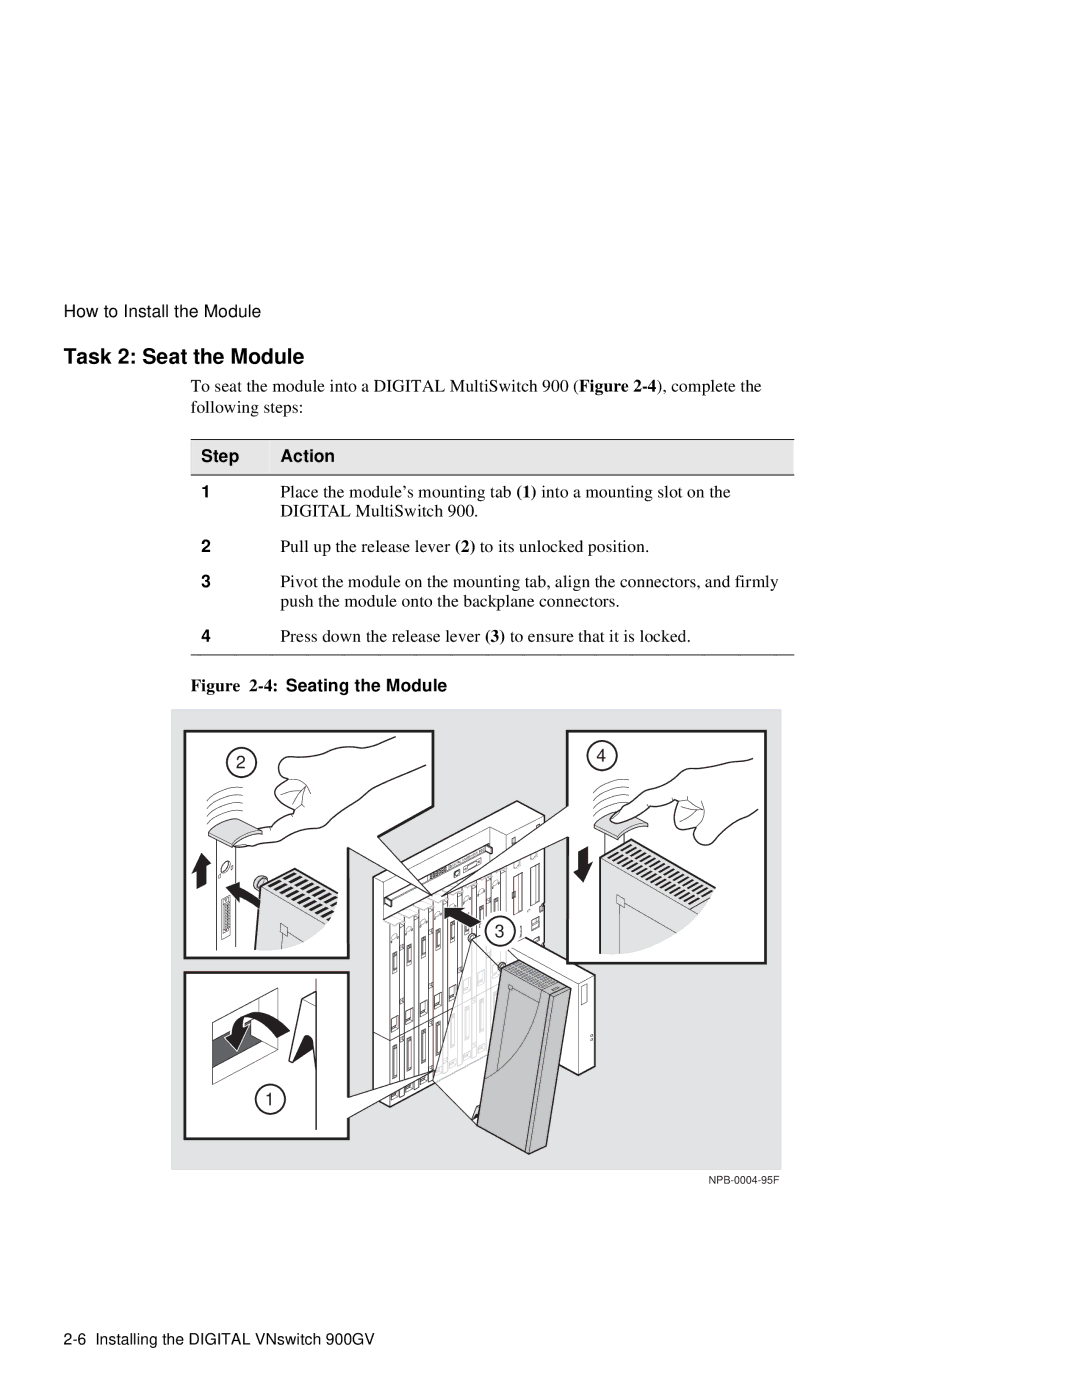 Network Technologies 900GV manual Task 2 Seat the Module, Step Action 